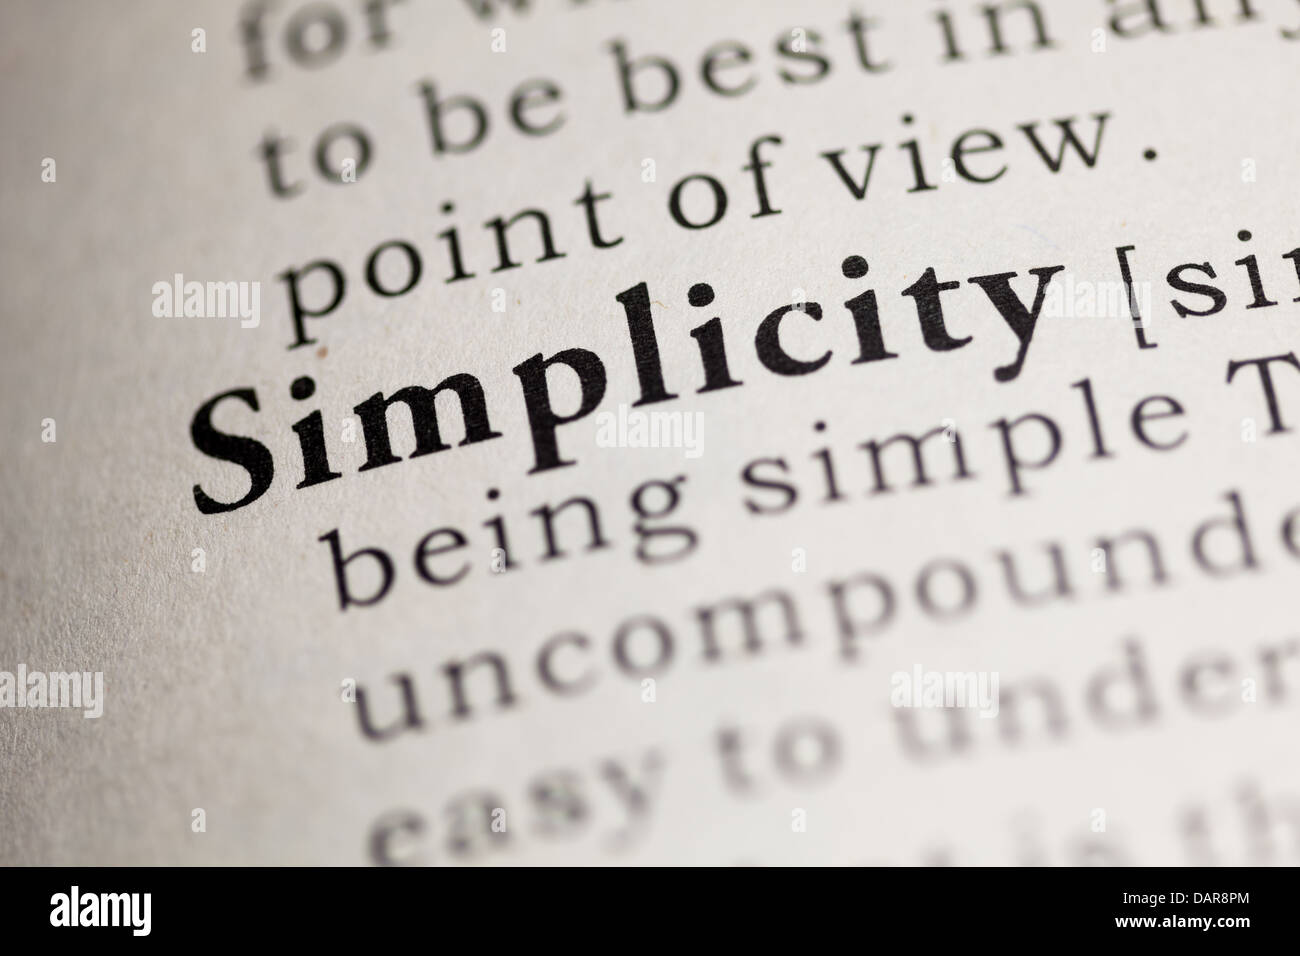 Fake Dictionary, Dictionary definition of the word Simplicity. Stock Photo